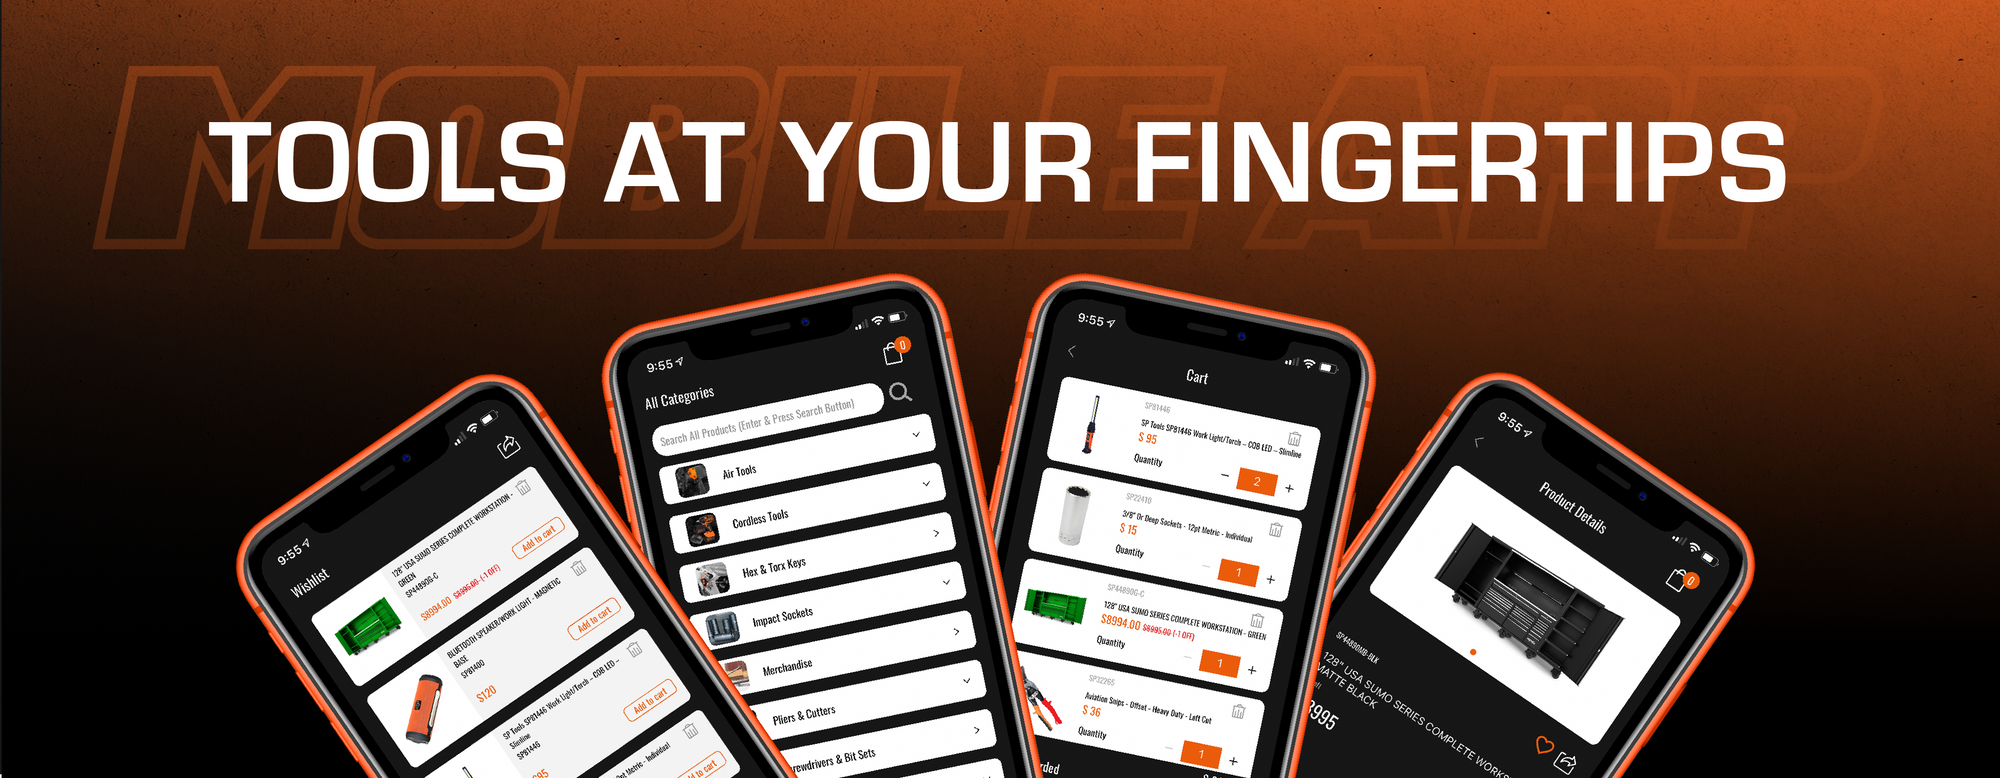 Tools at Your Fingertips Banner